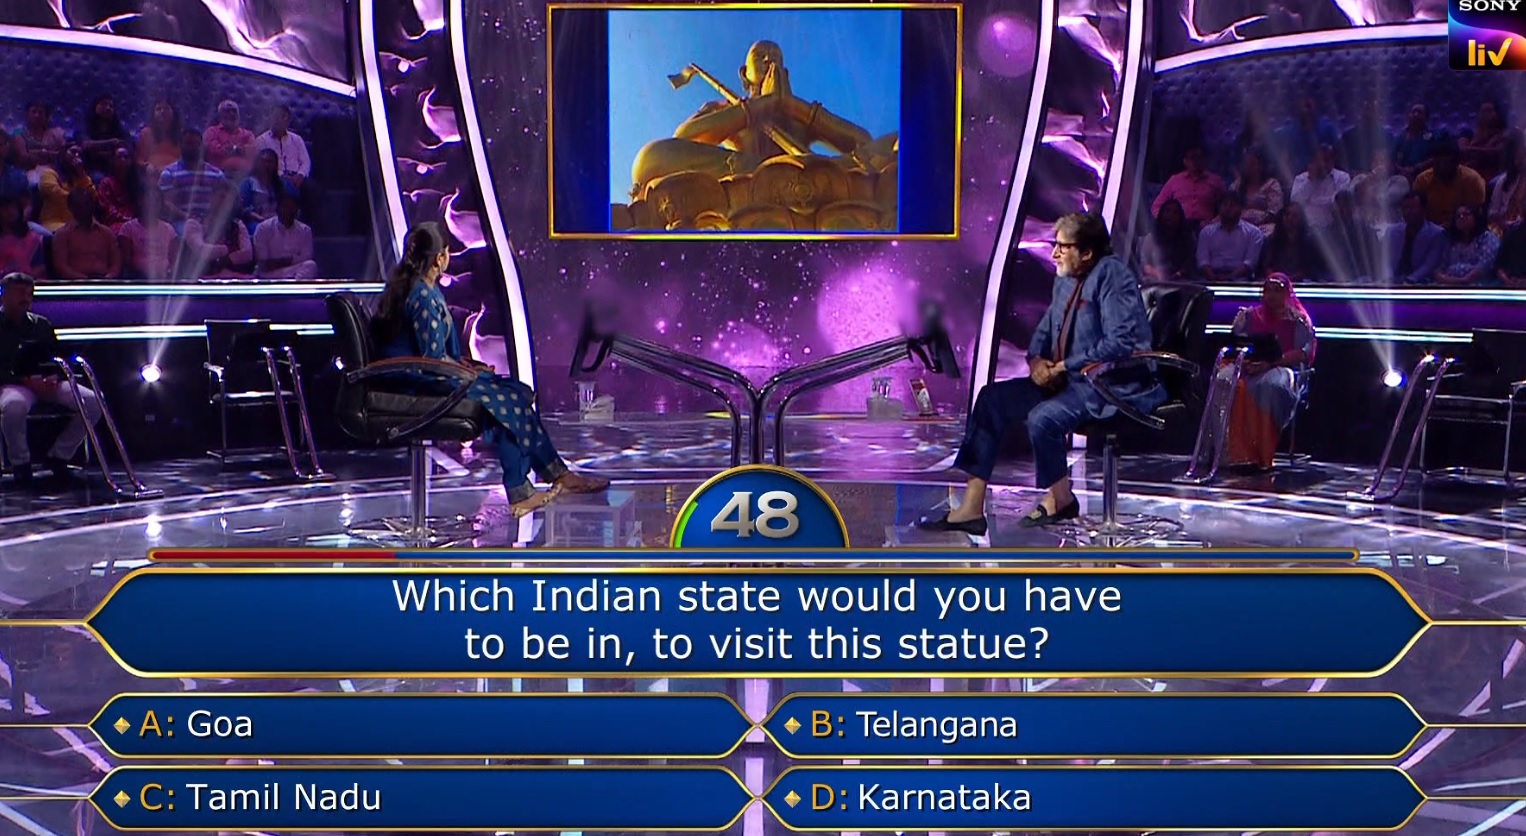 Ques : Which Indian state would you have to be in, to visit this statue?